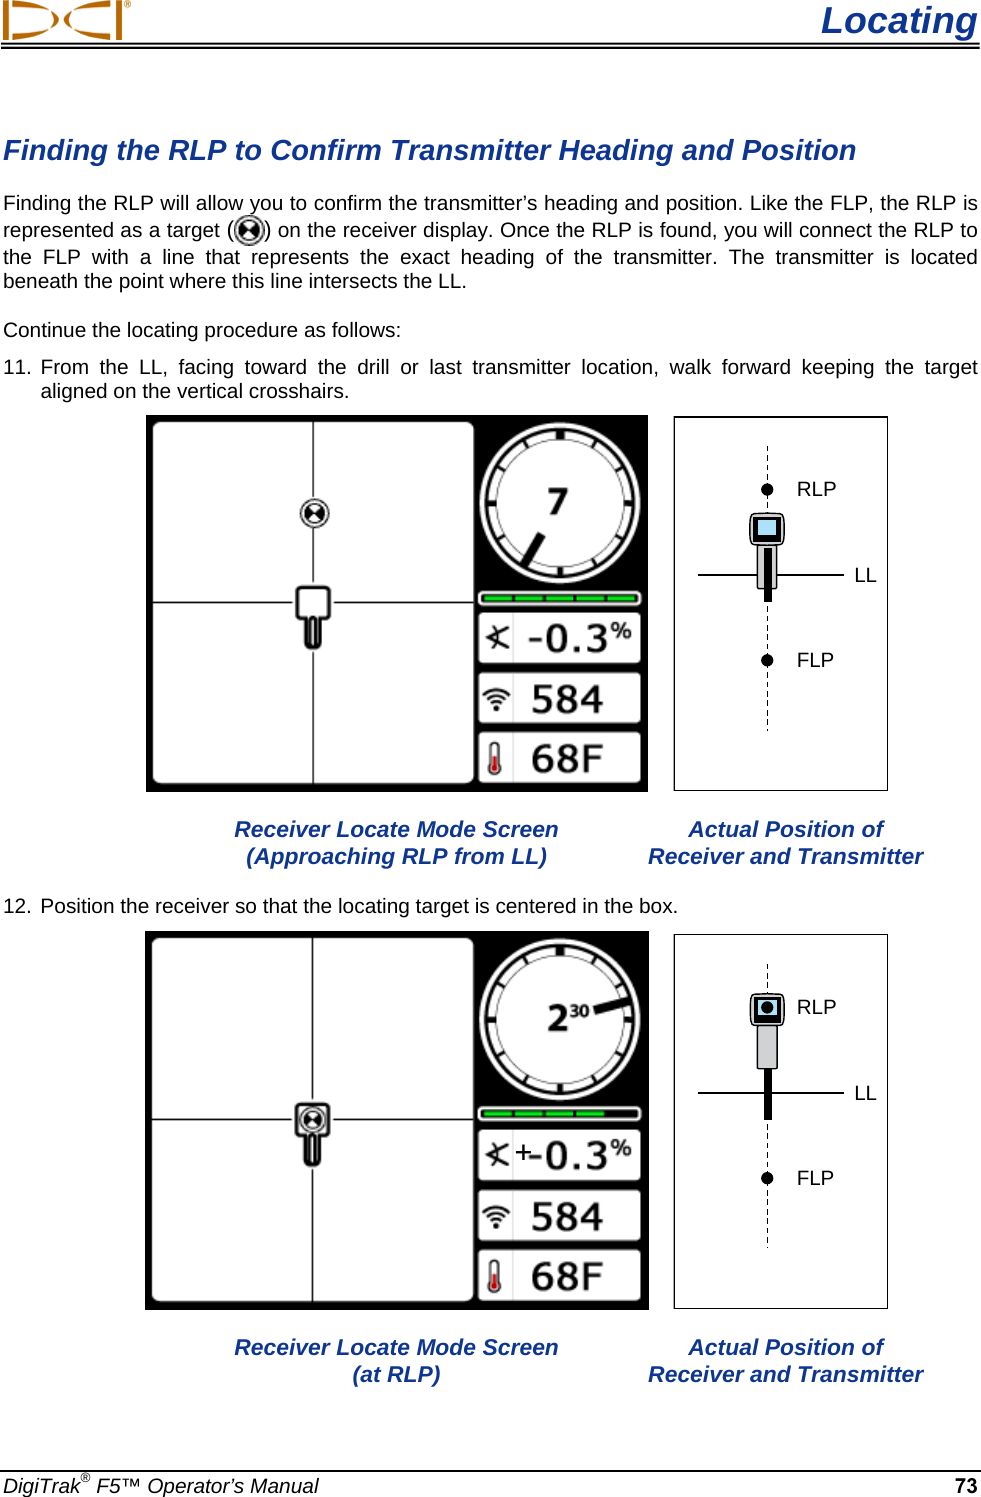  Locating DigiTrak® F5™ Operator’s Manual 73 Finding the RLP to Confirm Transmitter Heading and Position Finding the RLP will allow you to confirm the transmitter’s heading and position. Like the FLP, the RLP is represented as a target ( ) on the receiver display. Once the RLP is found, you will connect the RLP to the FLP with a line that represents the exact heading of the transmitter. The transmitter is located beneath the point where this line intersects the LL. Continue the locating procedure as follows: 11. From the LL, facing toward the drill or last transmitter location, walk forward keeping the target aligned on the vertical crosshairs.    RLPFLPLL Receiver Locate Mode Screen  (Approaching RLP from LL)  Actual Position of Receiver and Transmitter 12. Position the receiver so that the locating target is centered in the box.     RLPFLPLL Receiver Locate Mode Screen  (at RLP)  Actual Position of Receiver and Transmitter +